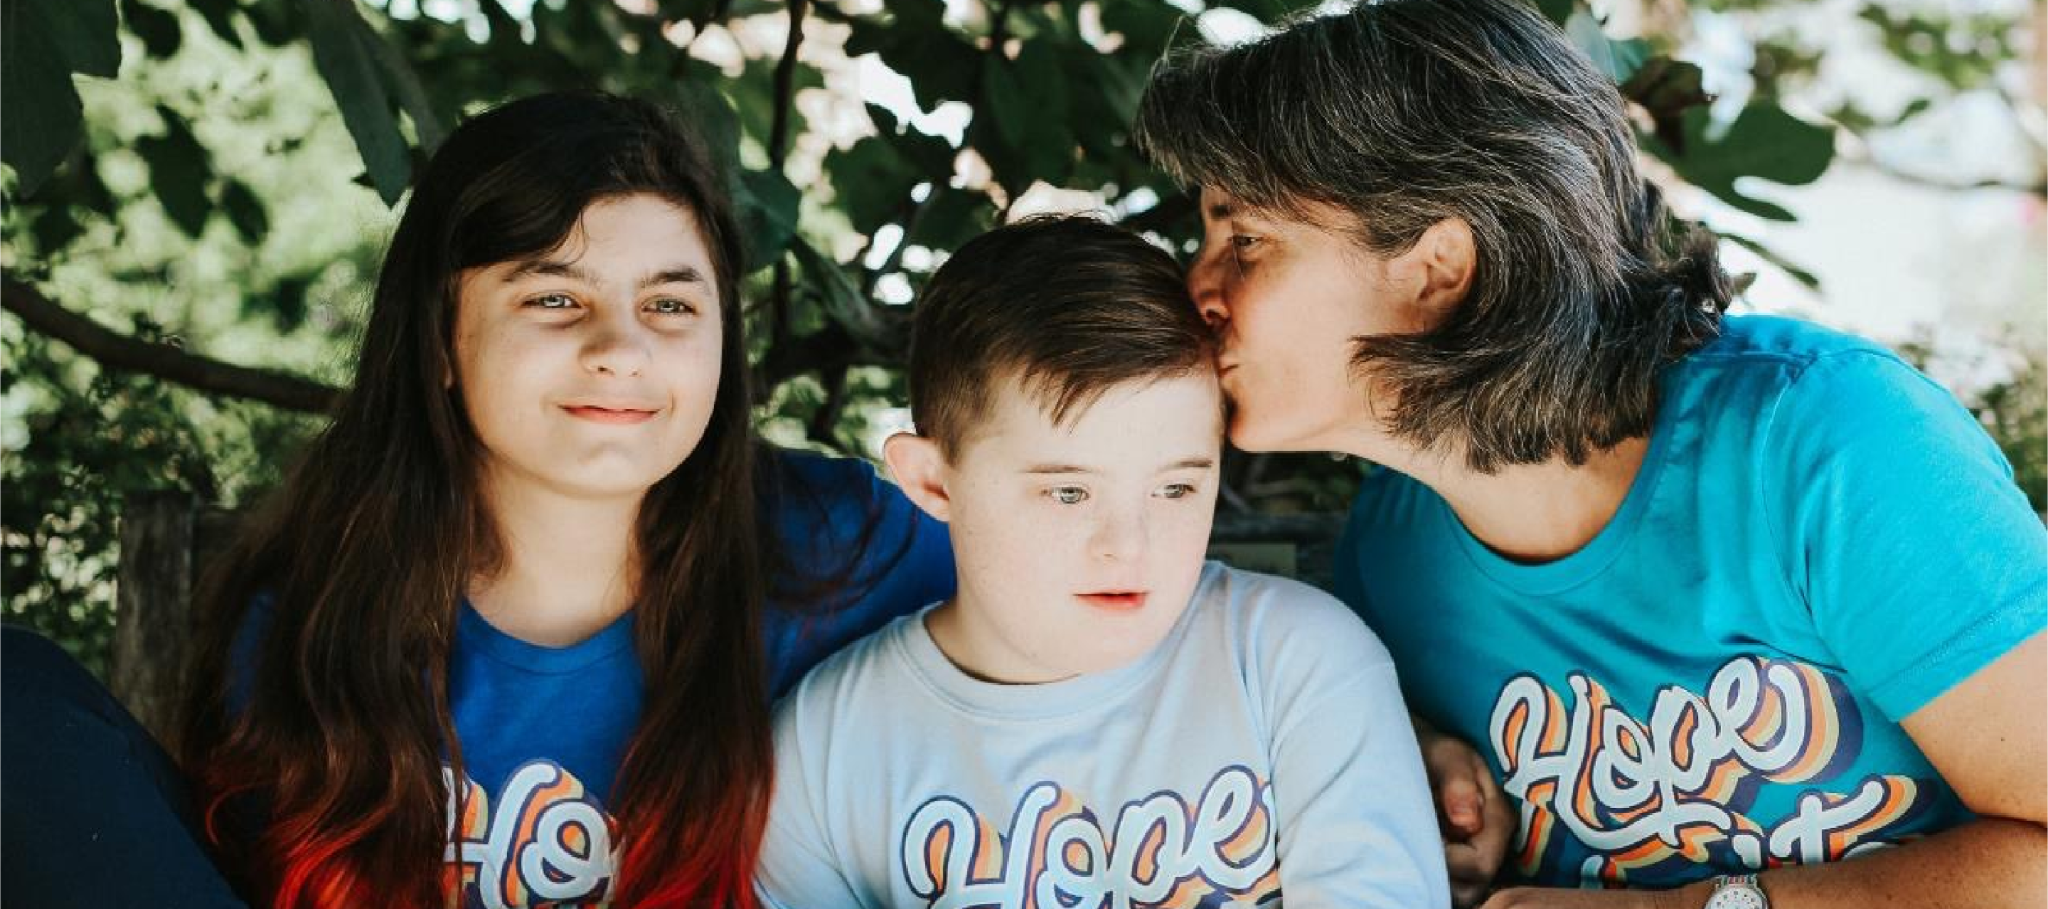 A mother and her two children sit together under a tree canopy wearing blue t-shirts with the word "Hope" on them. The mother is kissing the younger child, who has Down's Syndrome.